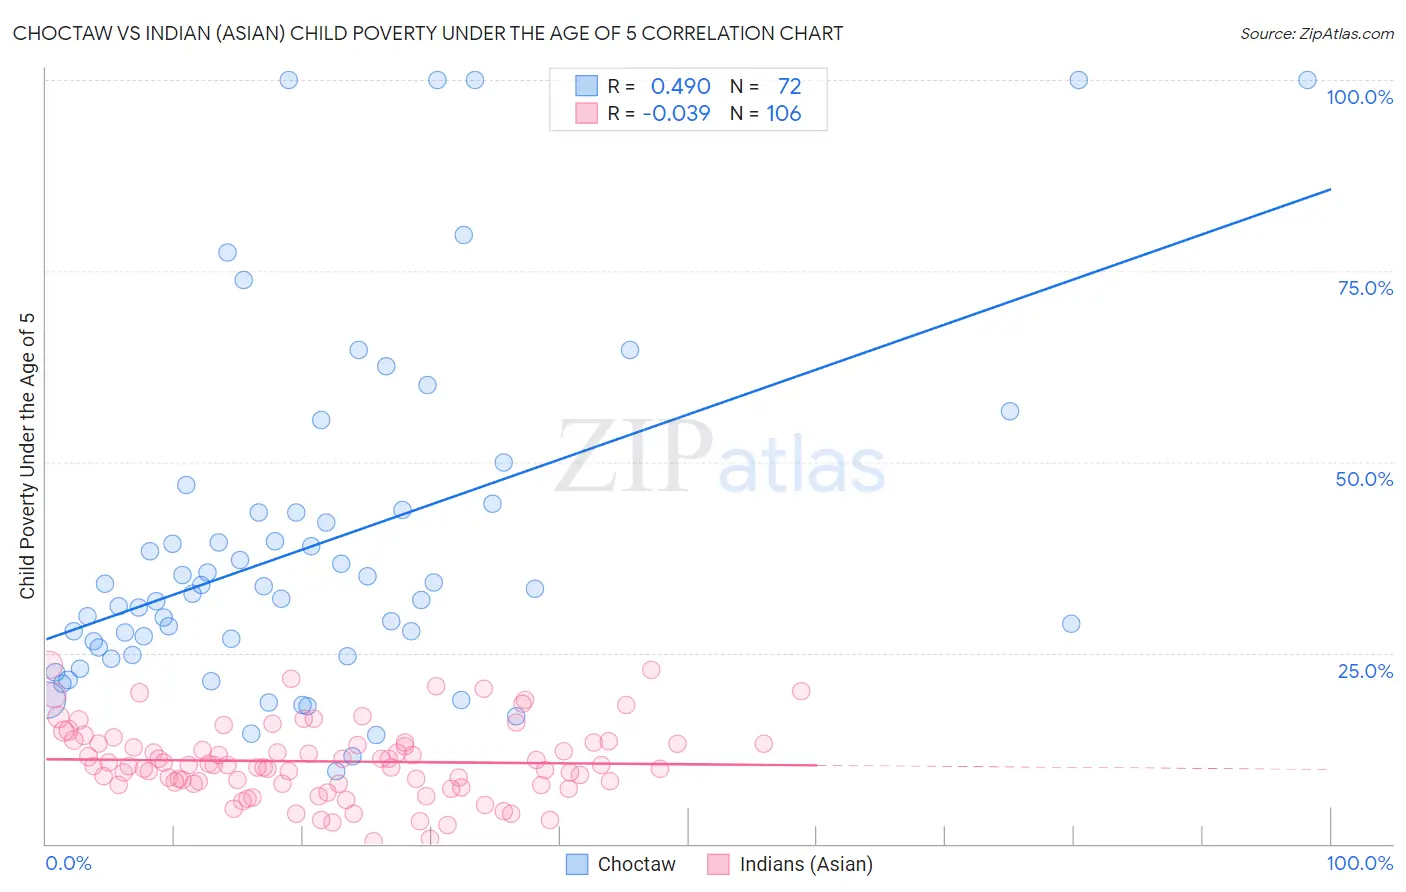 Choctaw vs Indian (Asian) Child Poverty Under the Age of 5